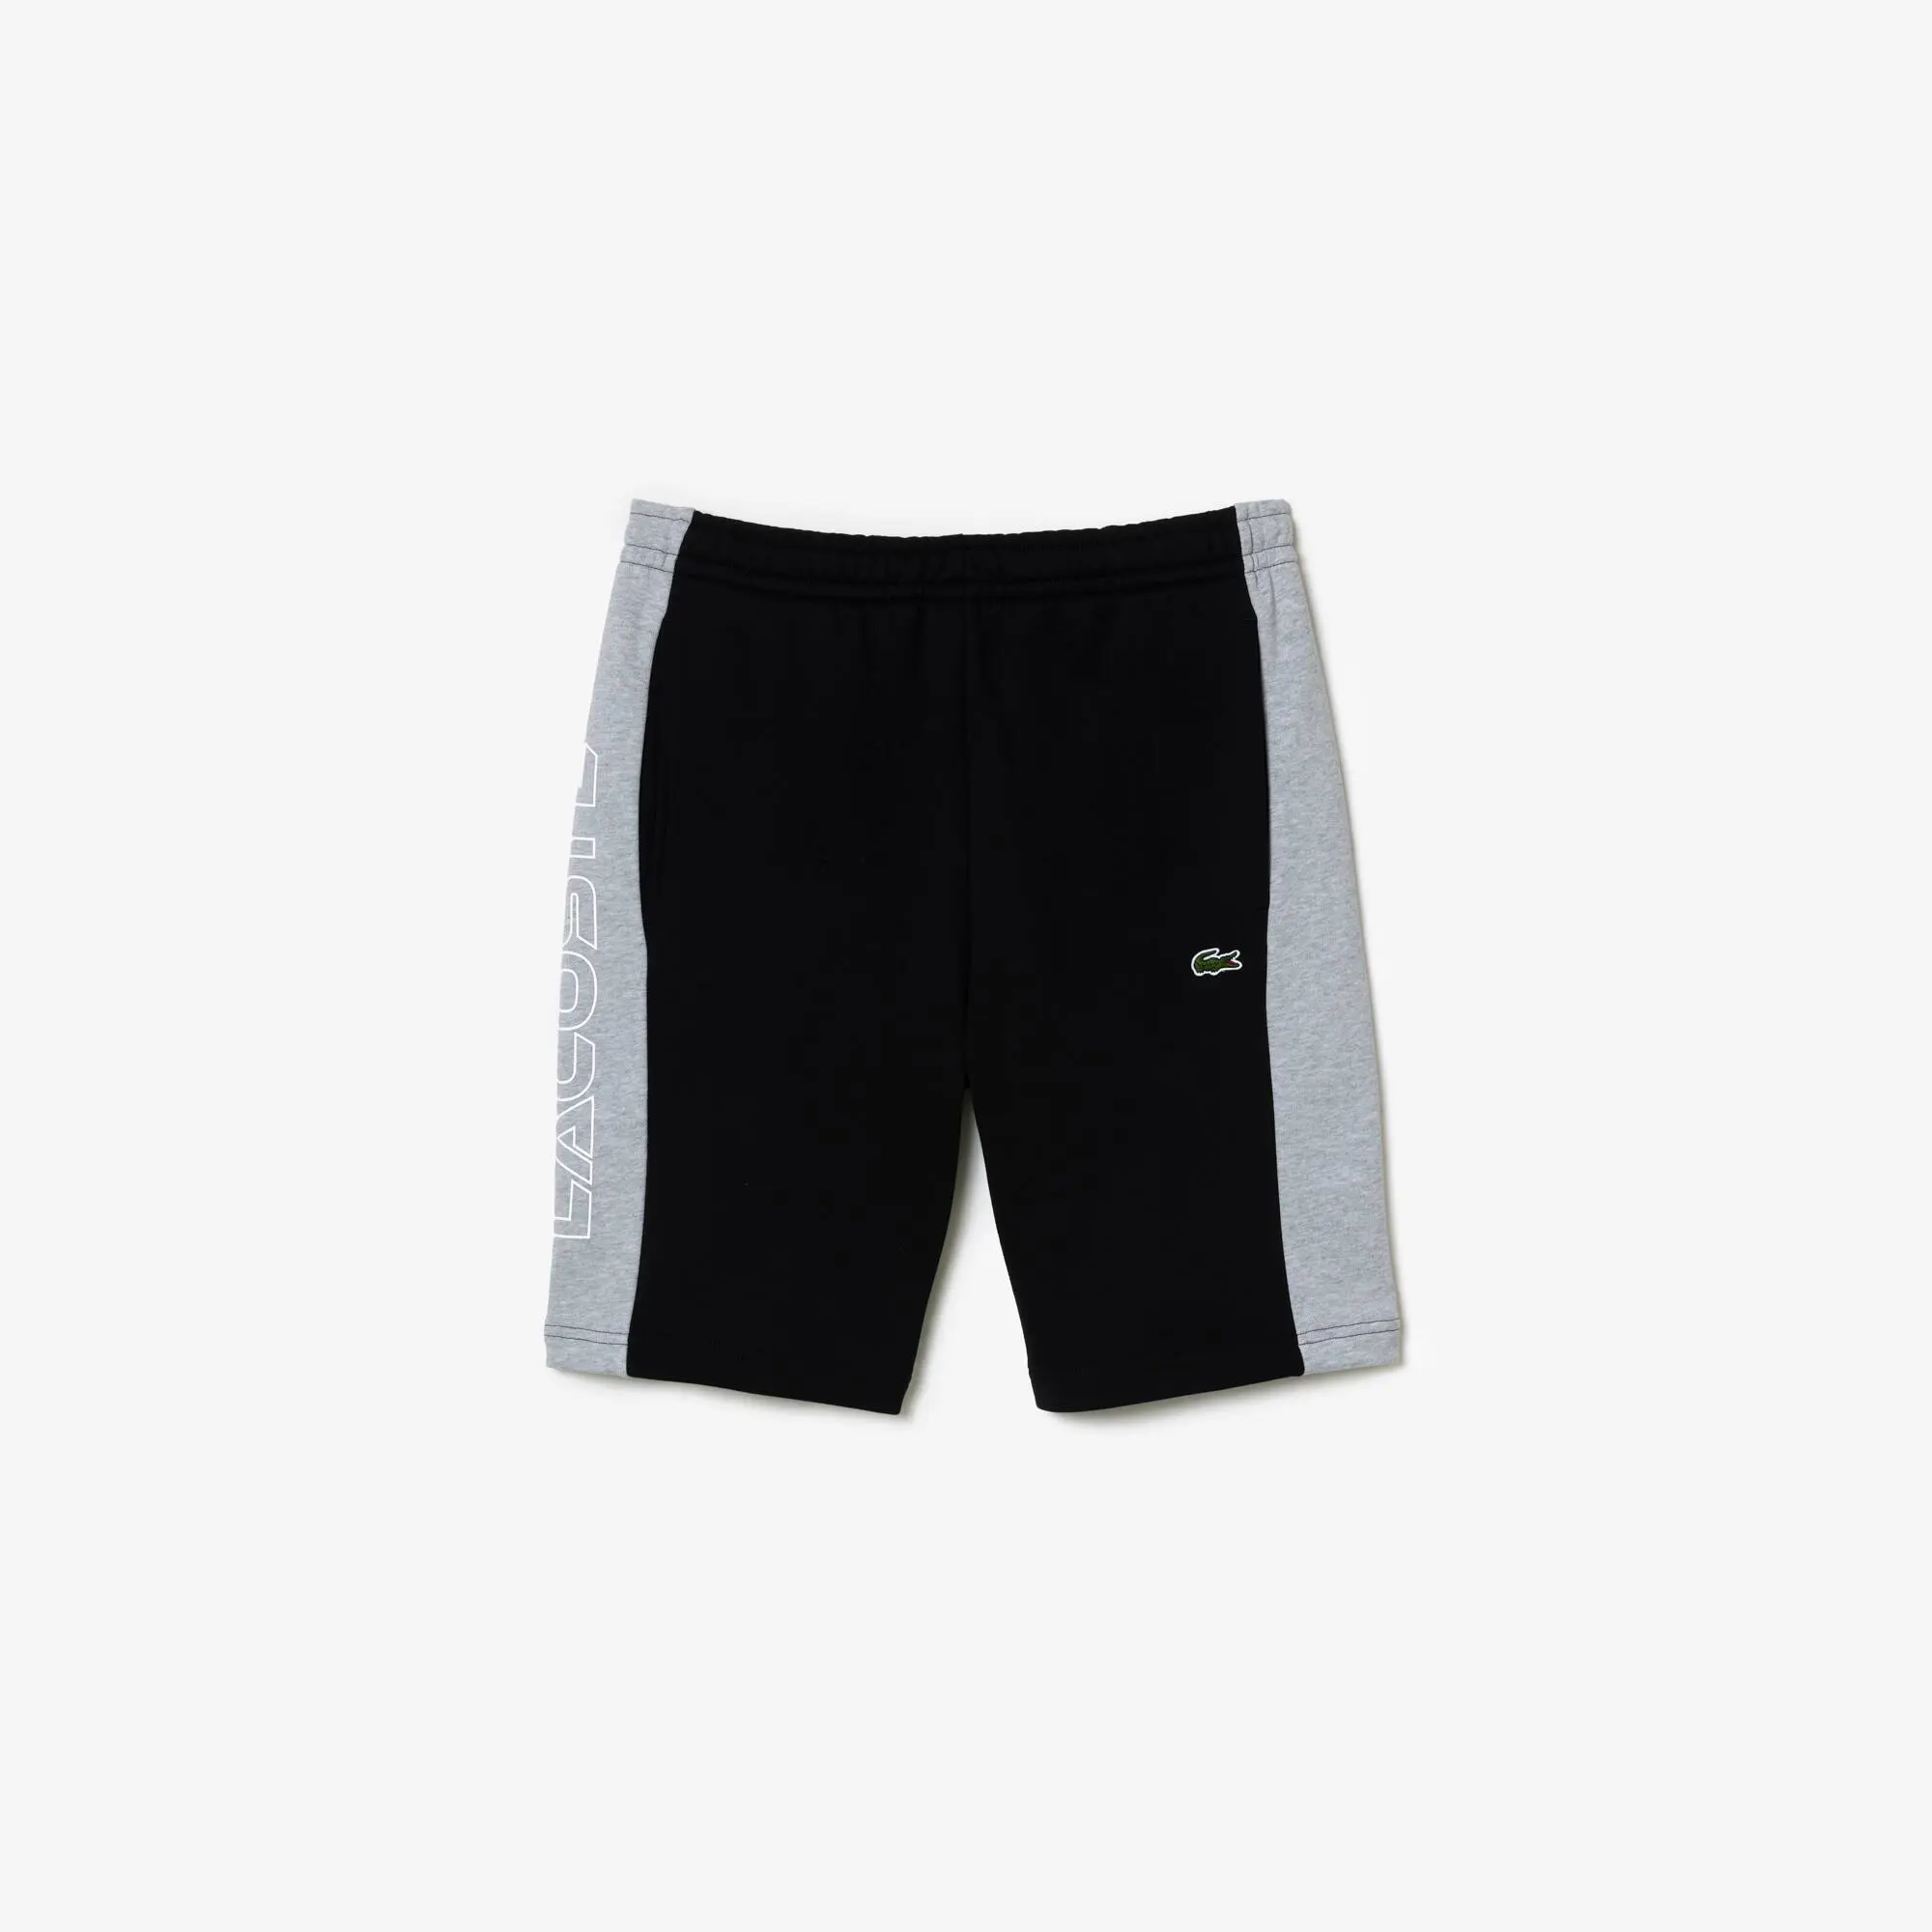 Lacoste Printed Unbrushed Fleece Colorblock Jogger Shorts. 1